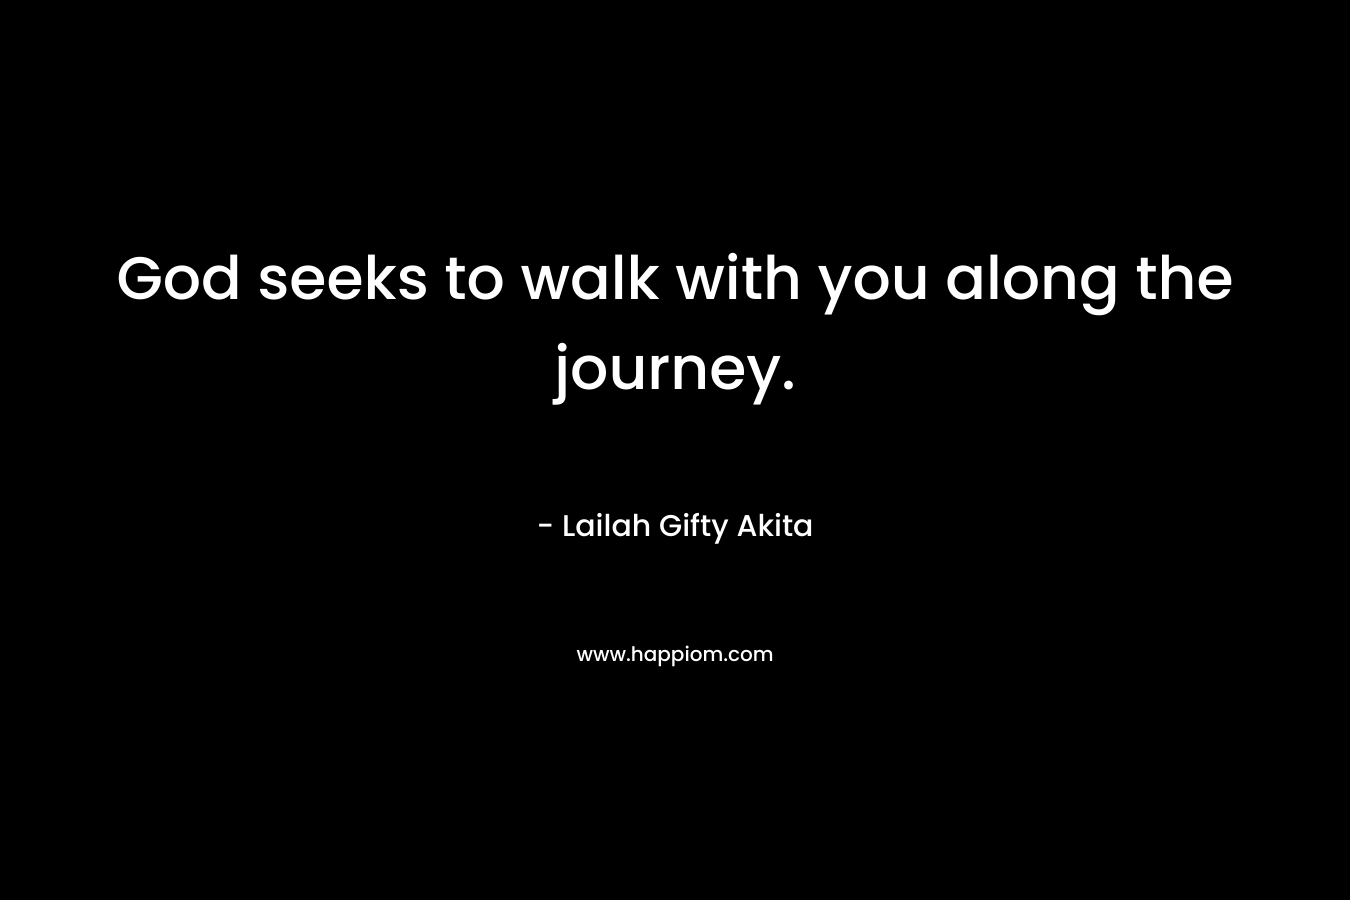 God seeks to walk with you along the journey.